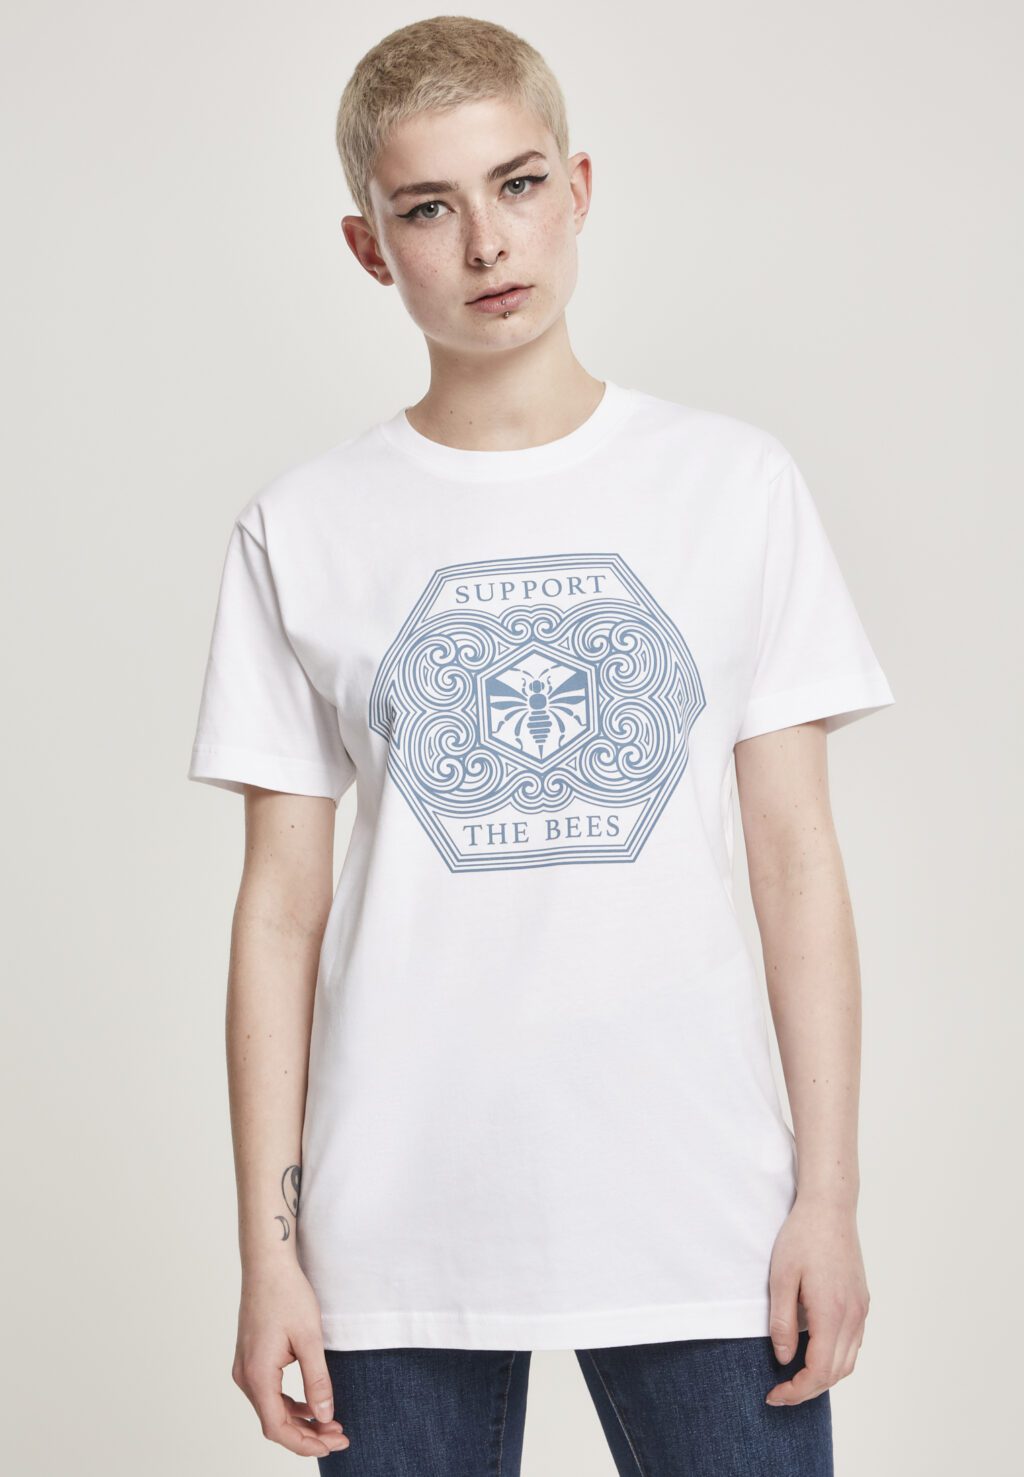 Ladies Support The Bees Tee white MT1038